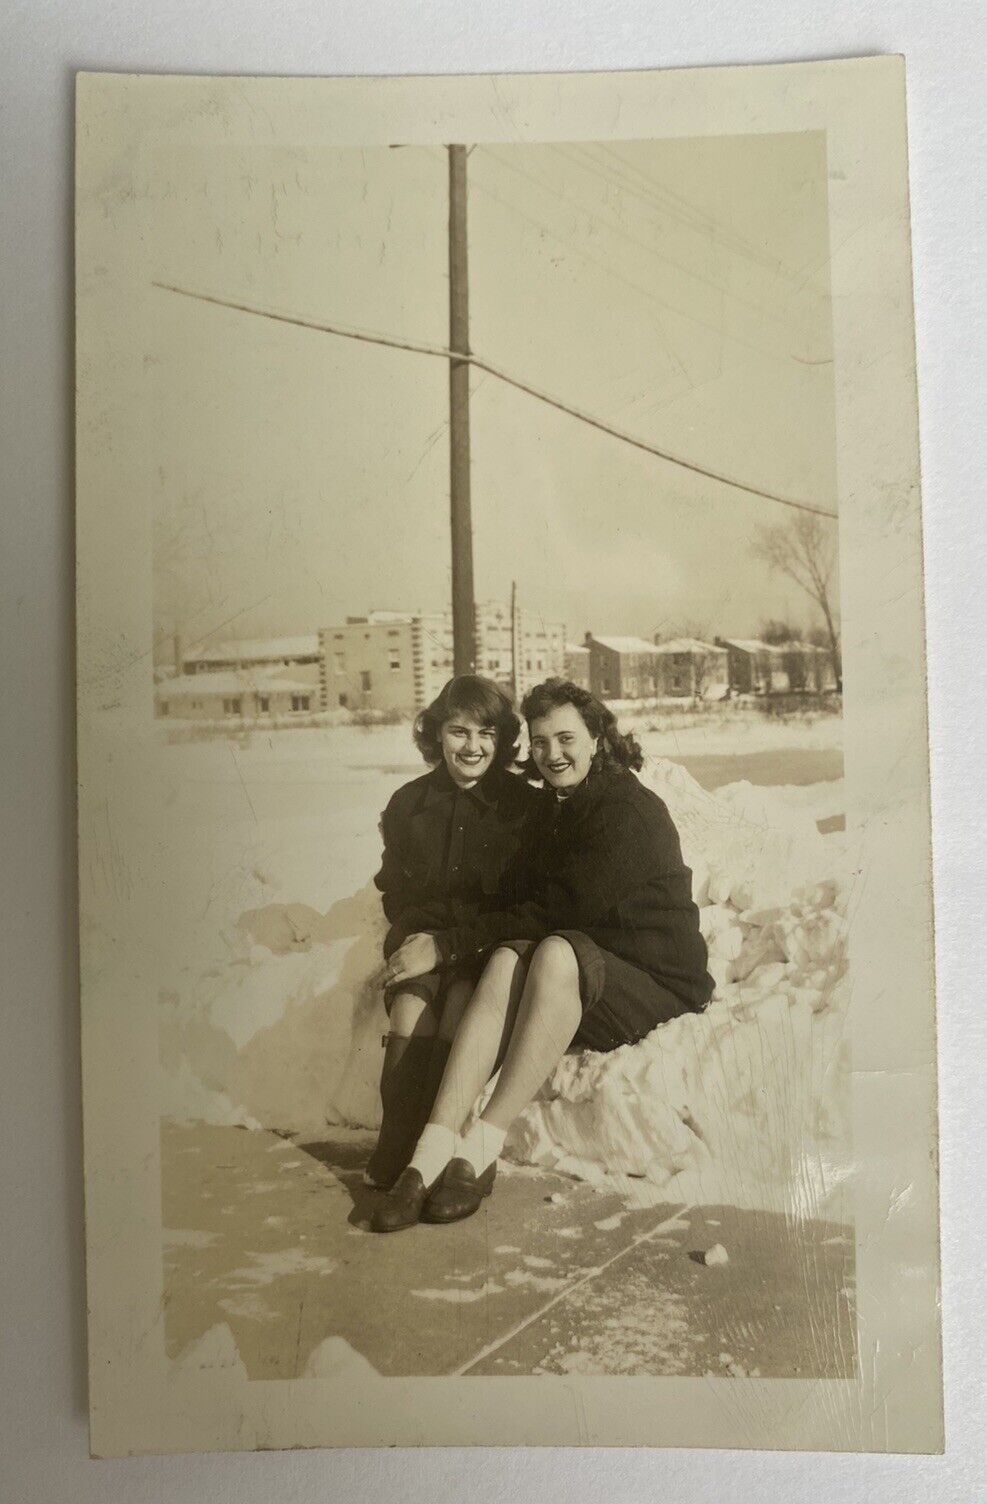 Beautiful Young Women Ladies Sisters Friends Snow Winter 1940s B&W Vintage Photo